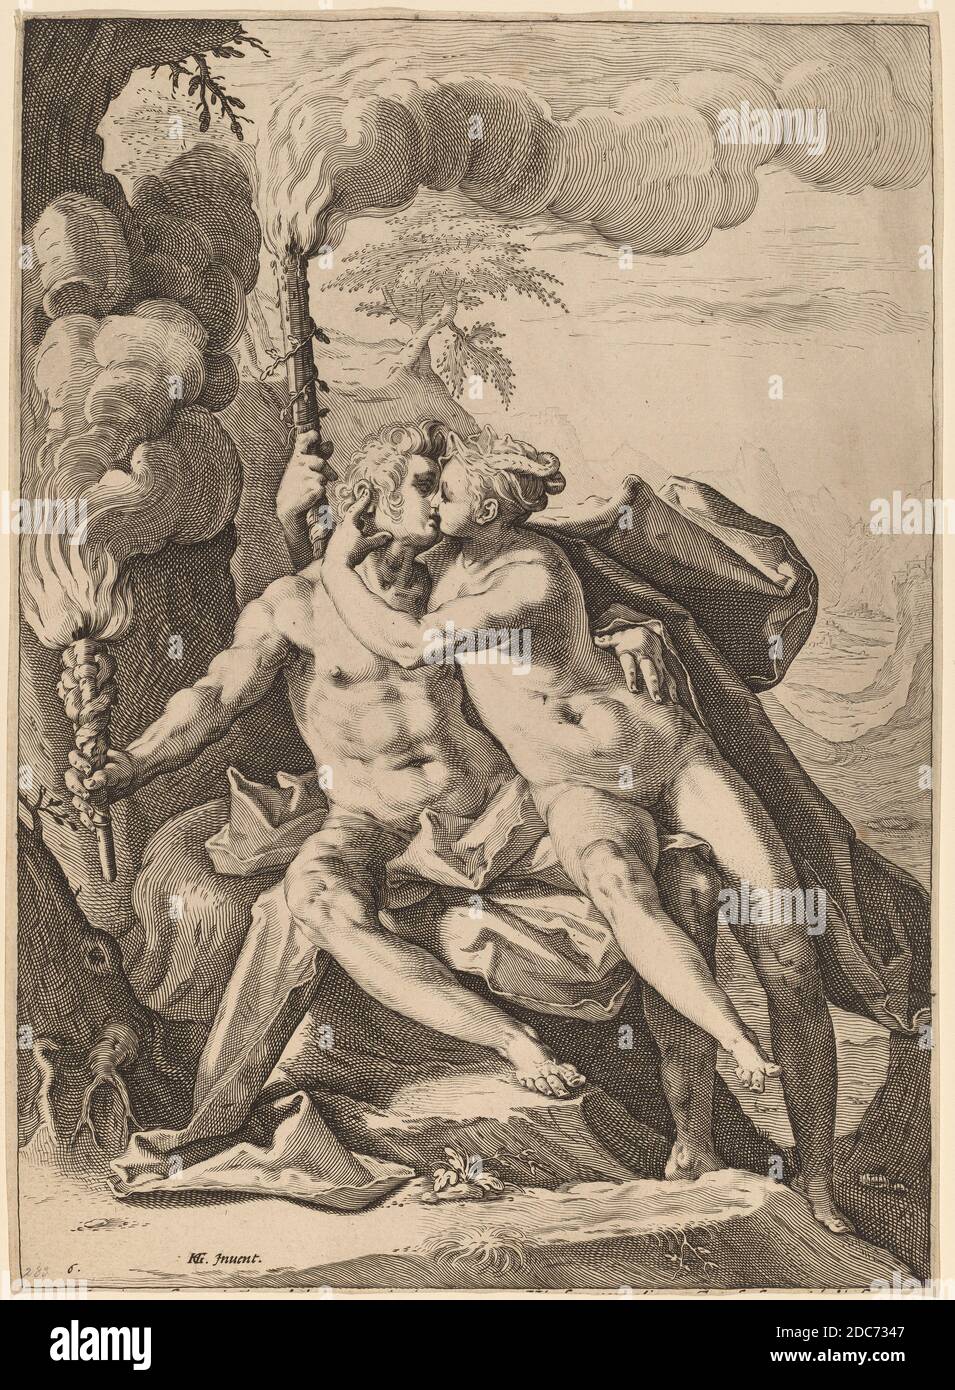 Jacob Matham, (artist), Dutch, 1571 - 1631, Hendrick Goltzius, (artist after), Dutch, 1558 - 1617, Eros and Anteros, Mythological Subjects: pl.6, (series), probably 1588, engraving on laid paper, sheet: 29.2 x 21.2 cm (11 1/2 x 8 3/8 in Stock Photo